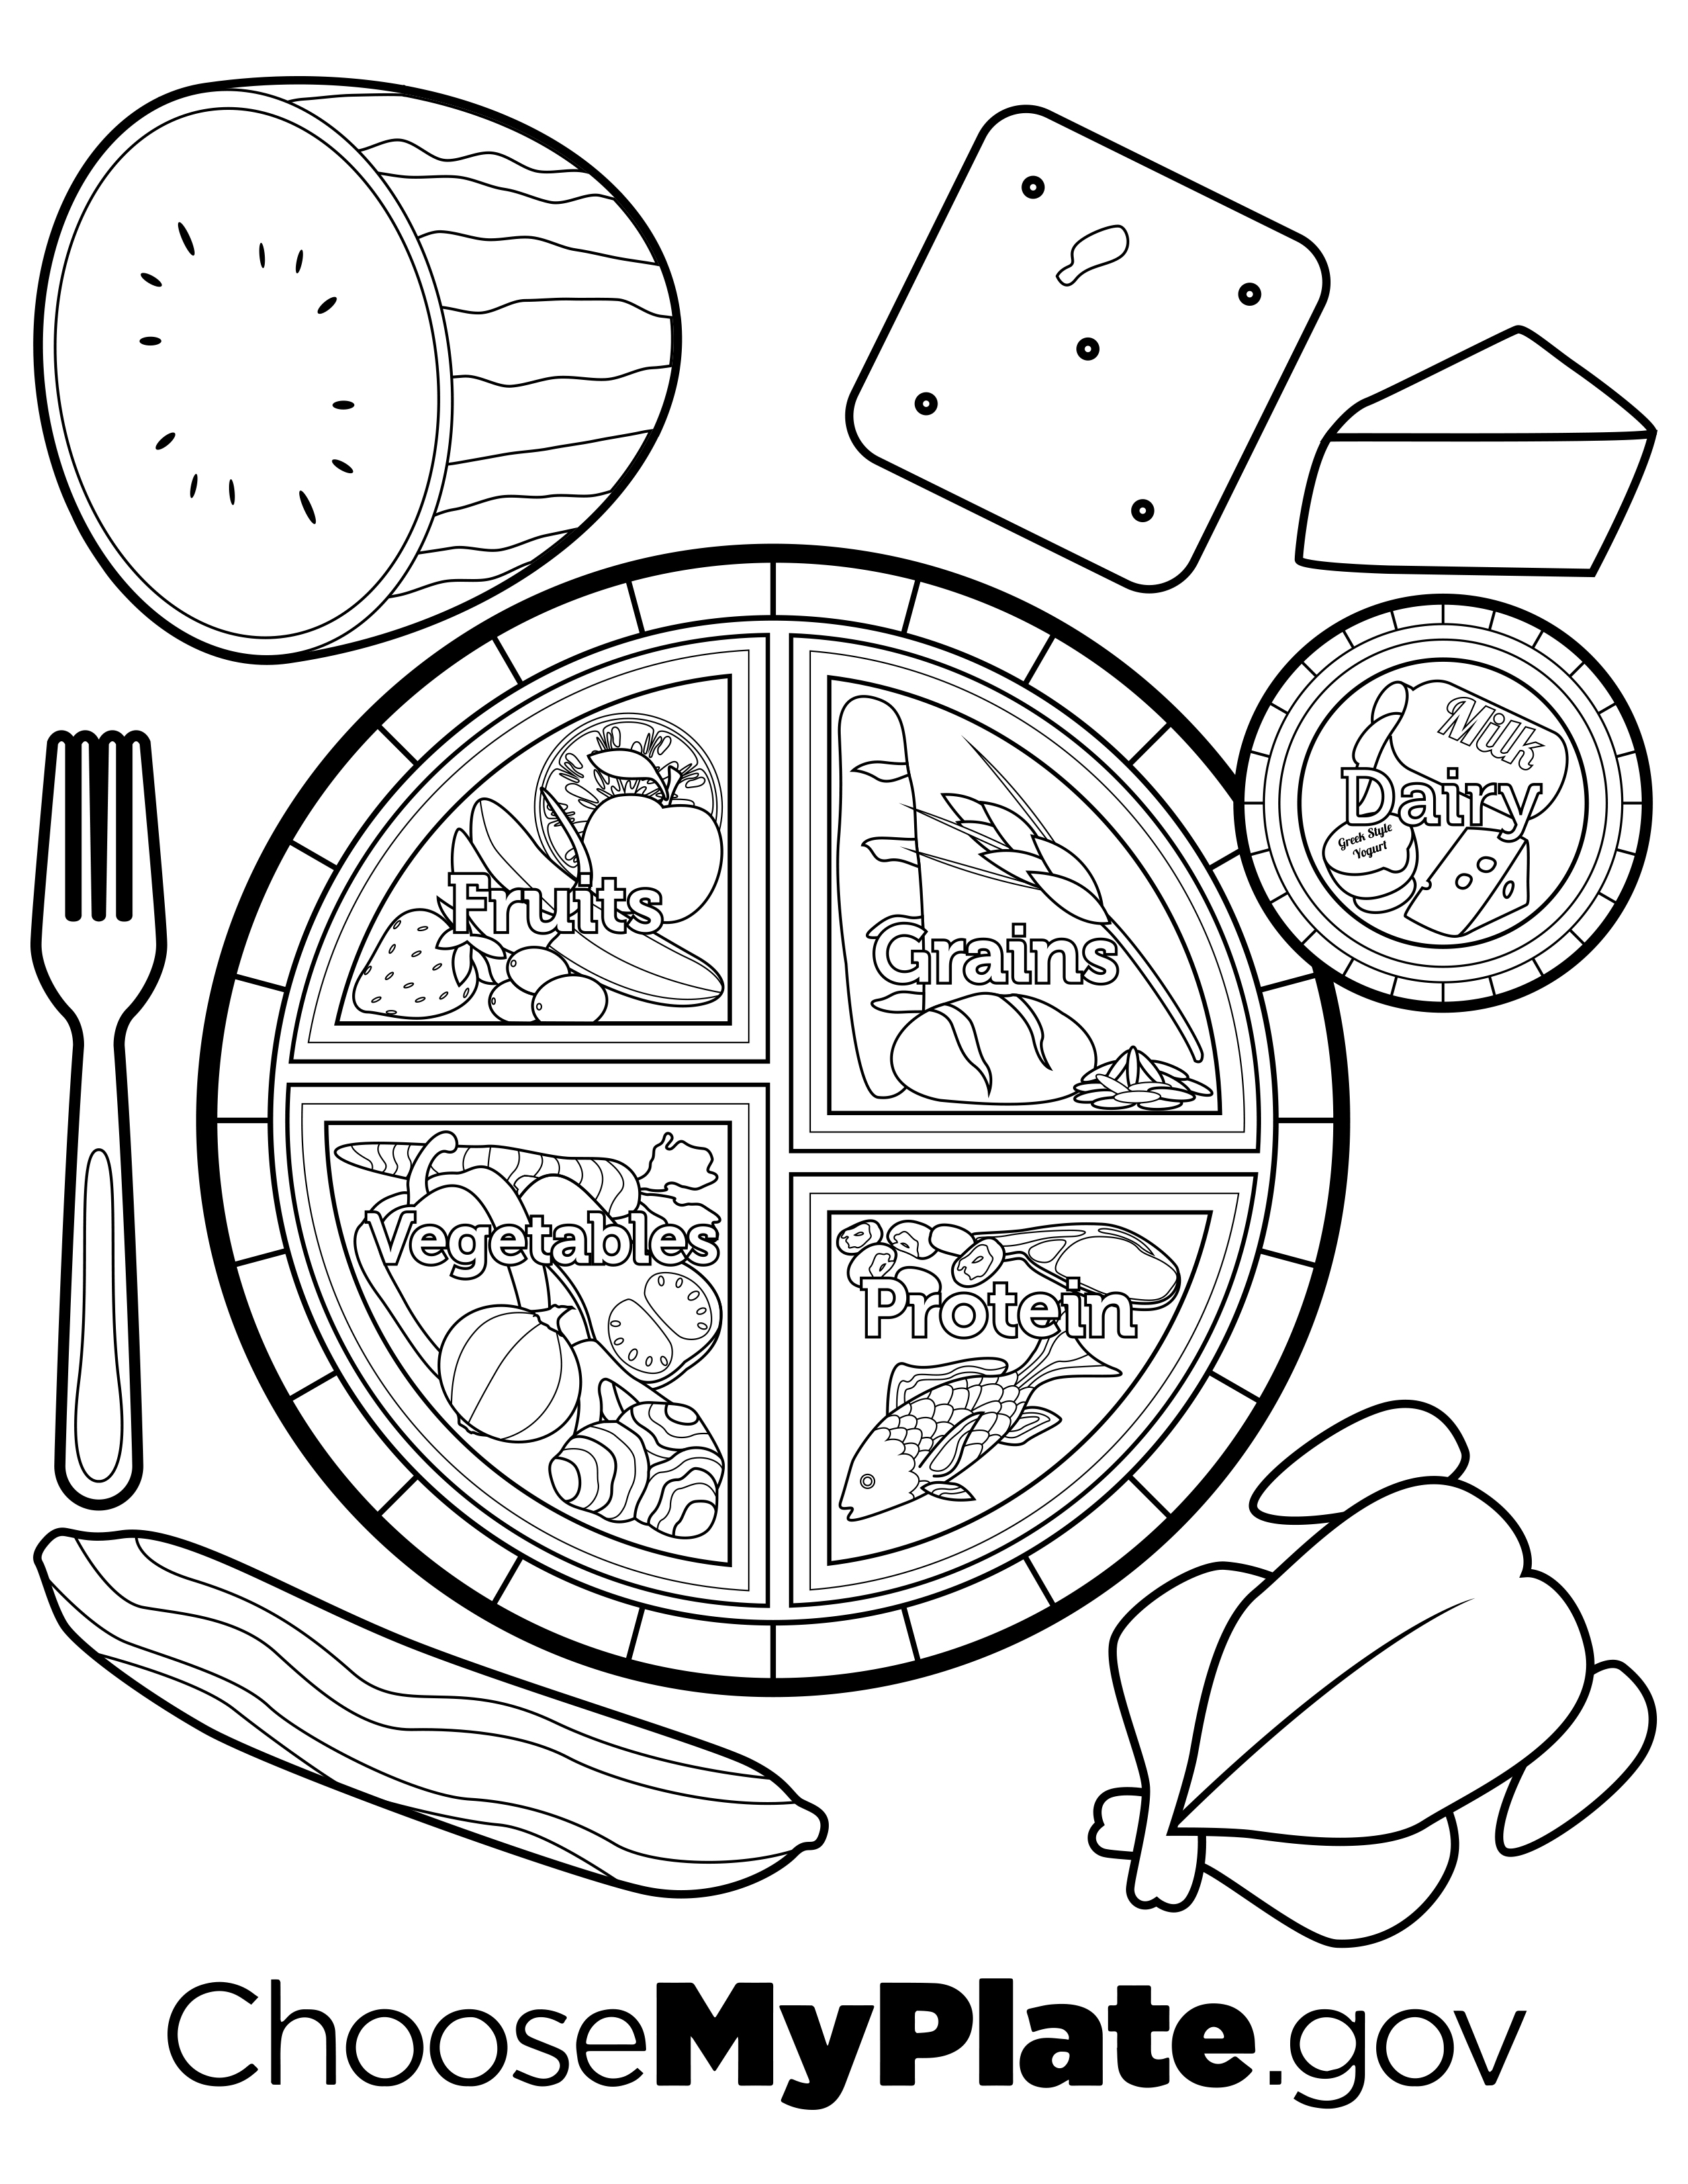 MyPlate Coloring Page   nutritioneducationstore.com